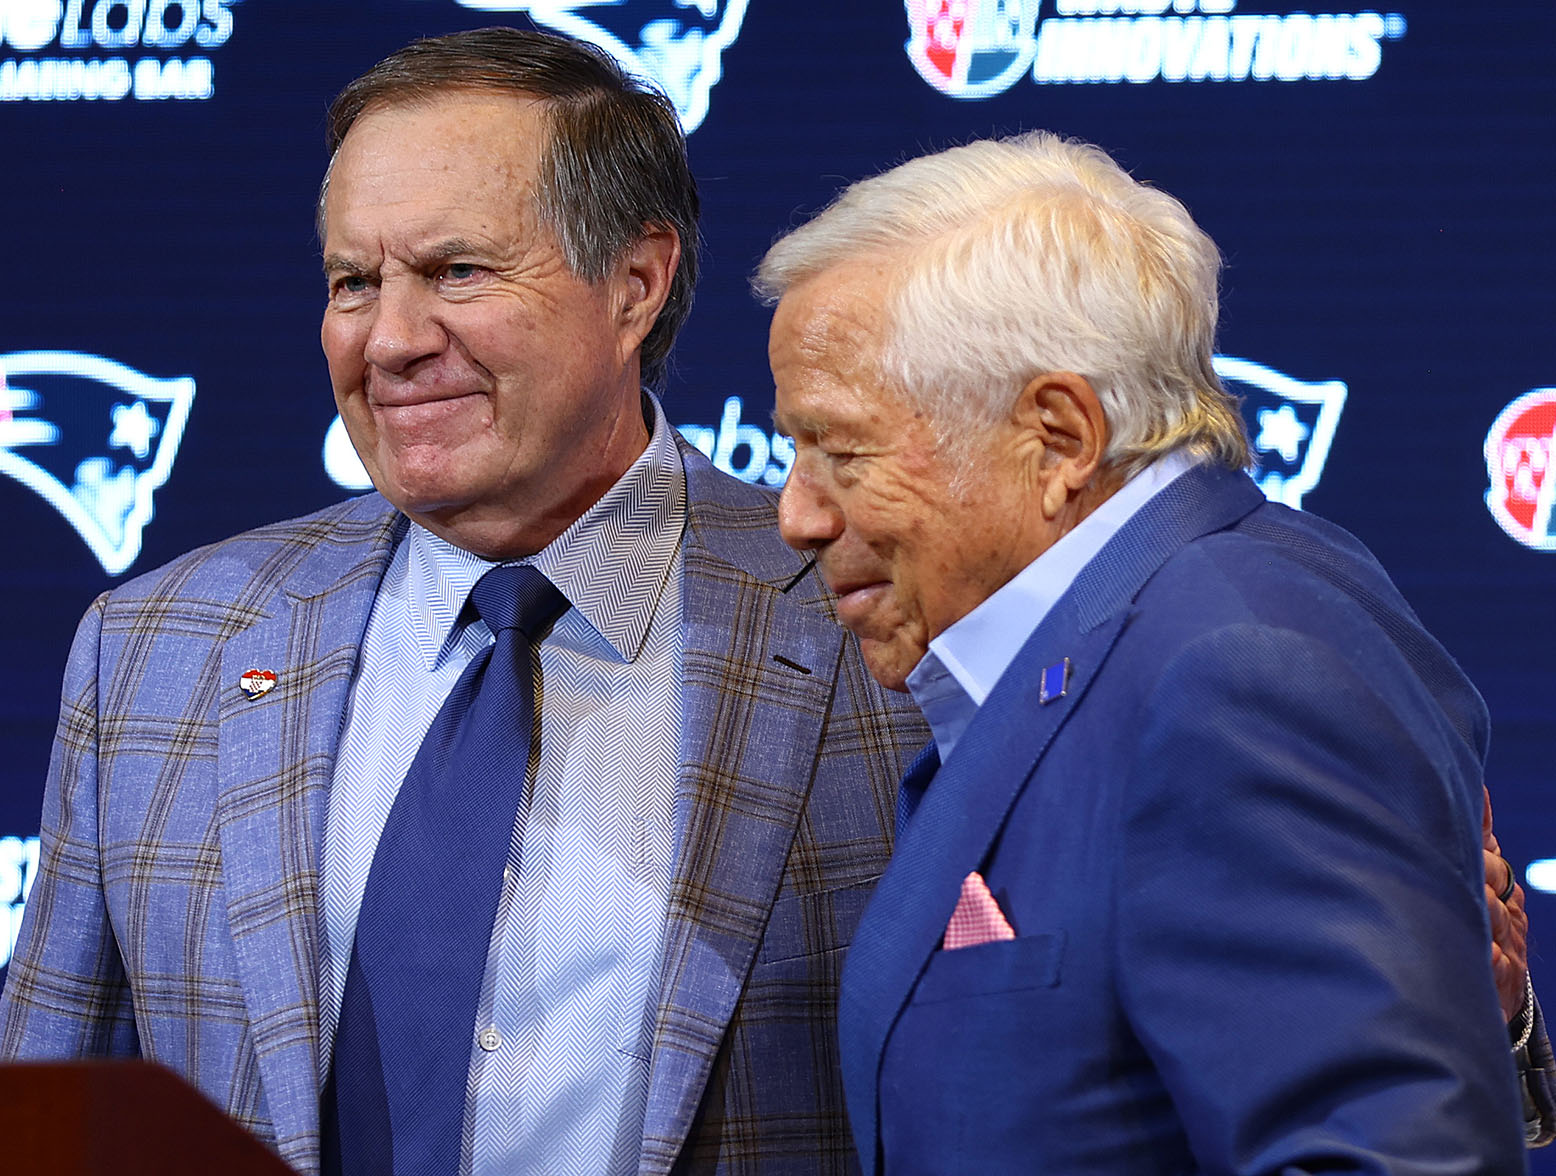 FOXBOROUGH, MASSACHUSETTS - JANUARY 11: Owner Robert Kraft (L) hugs head coach Bill Belichick (R) of the New England Patriots during a press conference at Gillette Stadium on January 11, 2024 in Foxborough, Massachusetts. Belichick announced he is stepping down as head coach after 24 seasons with the team. (Photo by Maddie Meyer/Getty Images)